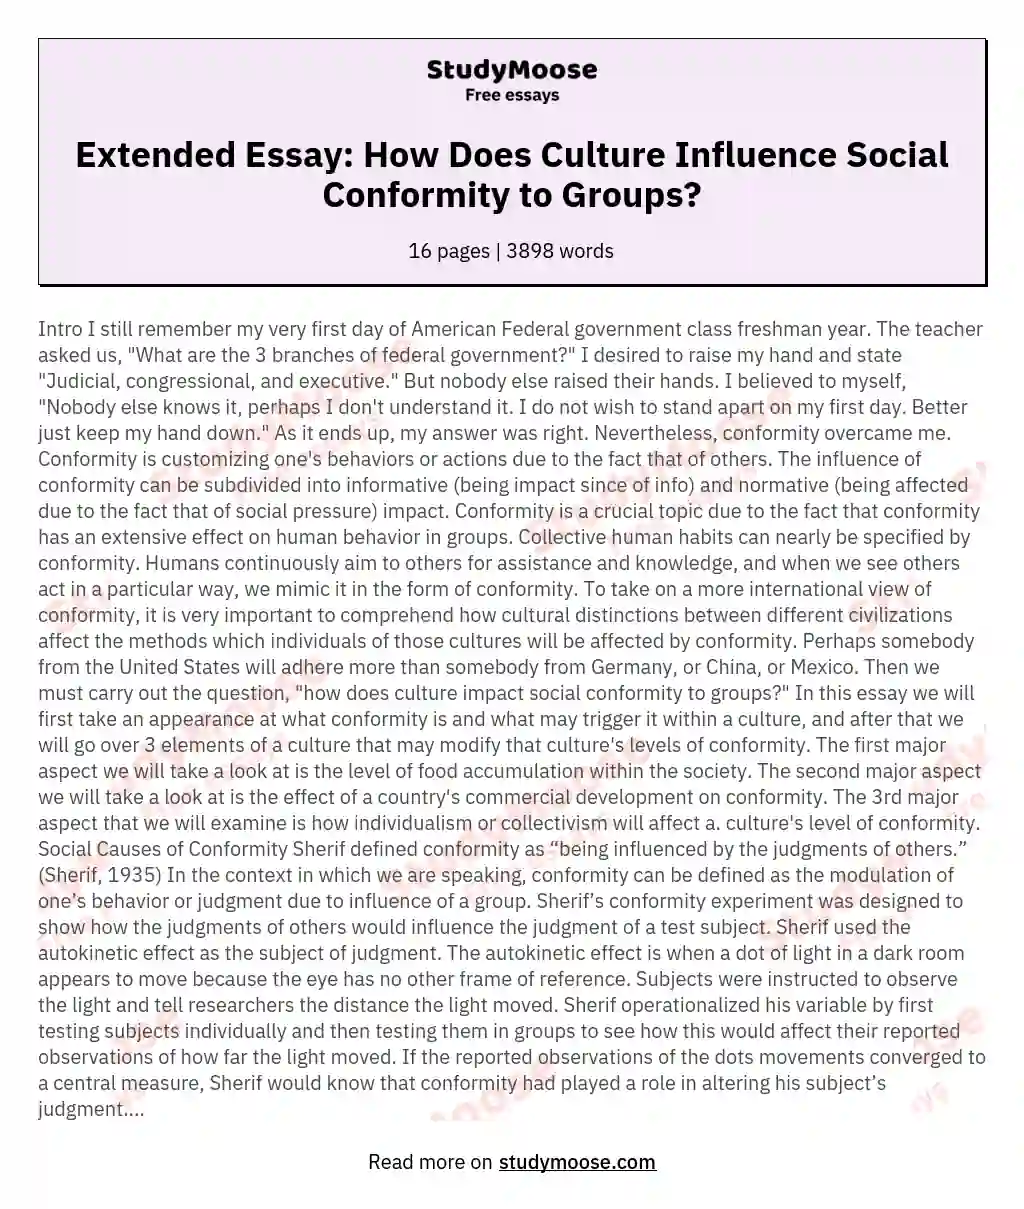 Extended Essay: How Does Culture Influence Social Conformity to Groups?